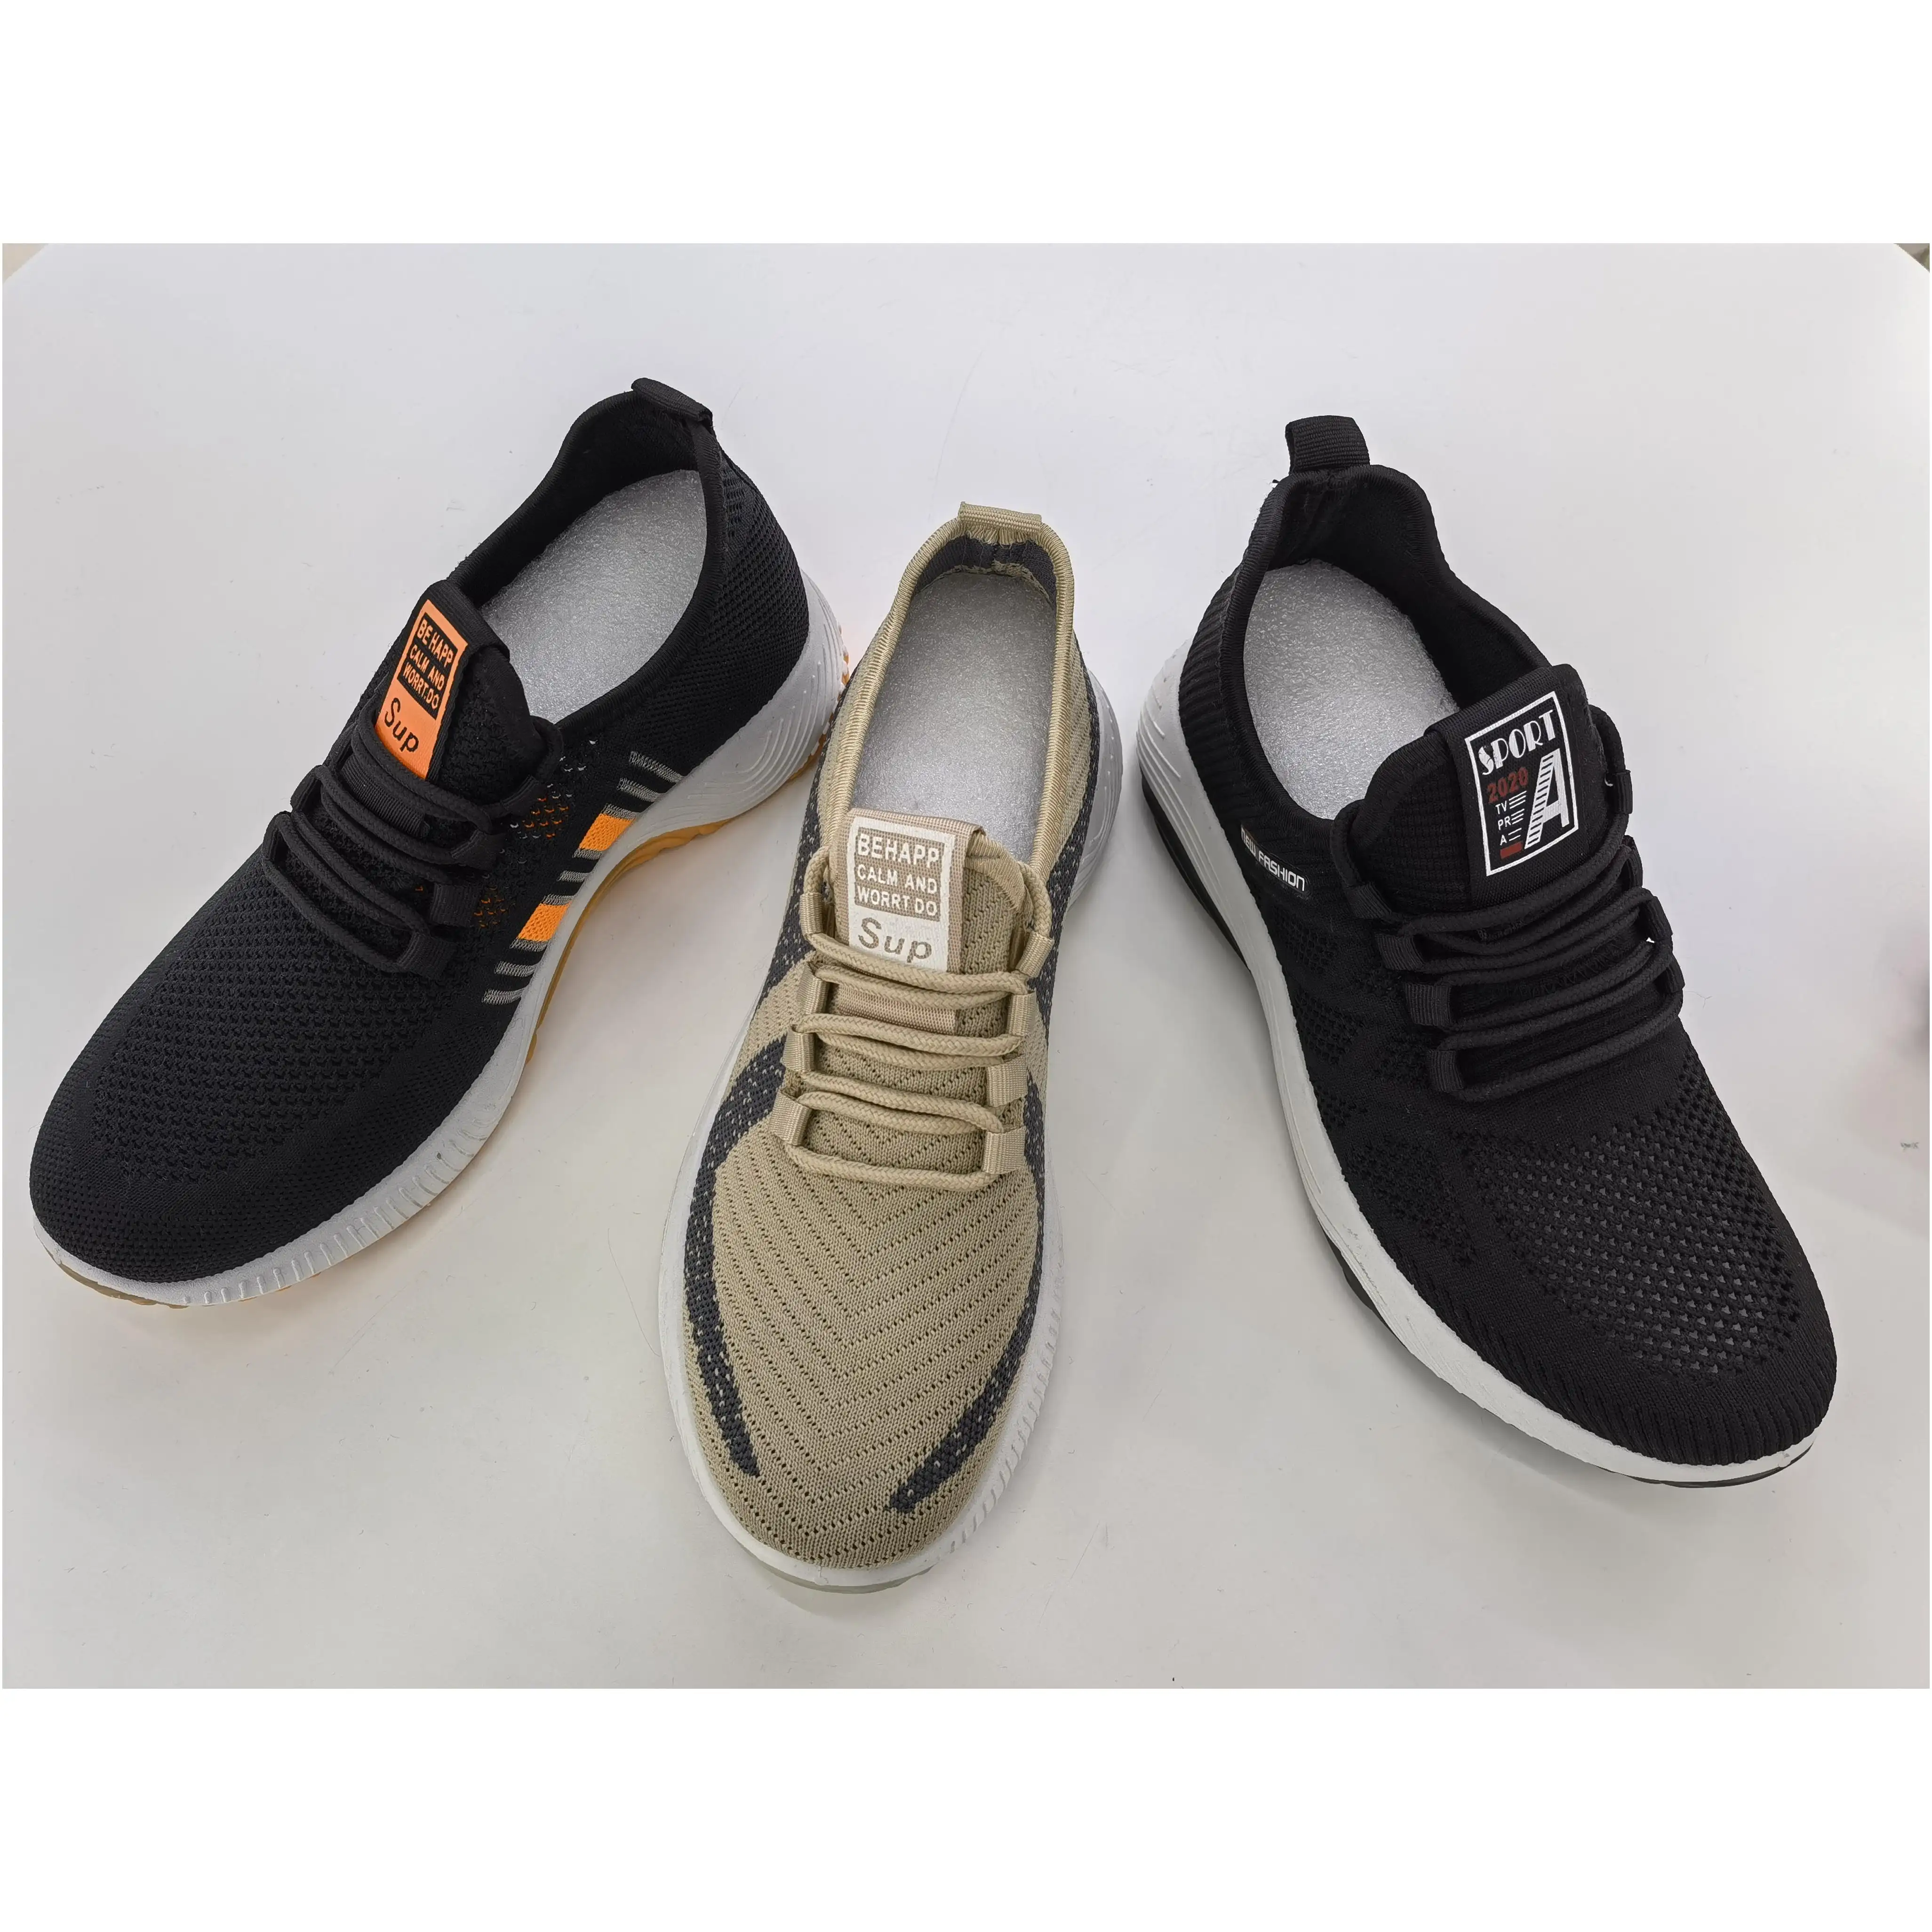 Walking Style Shoes Ladies Promotional Women New Arrivals Top Selling Hot Sale Hight Quality Sport Shoes With Prices In Pakistan